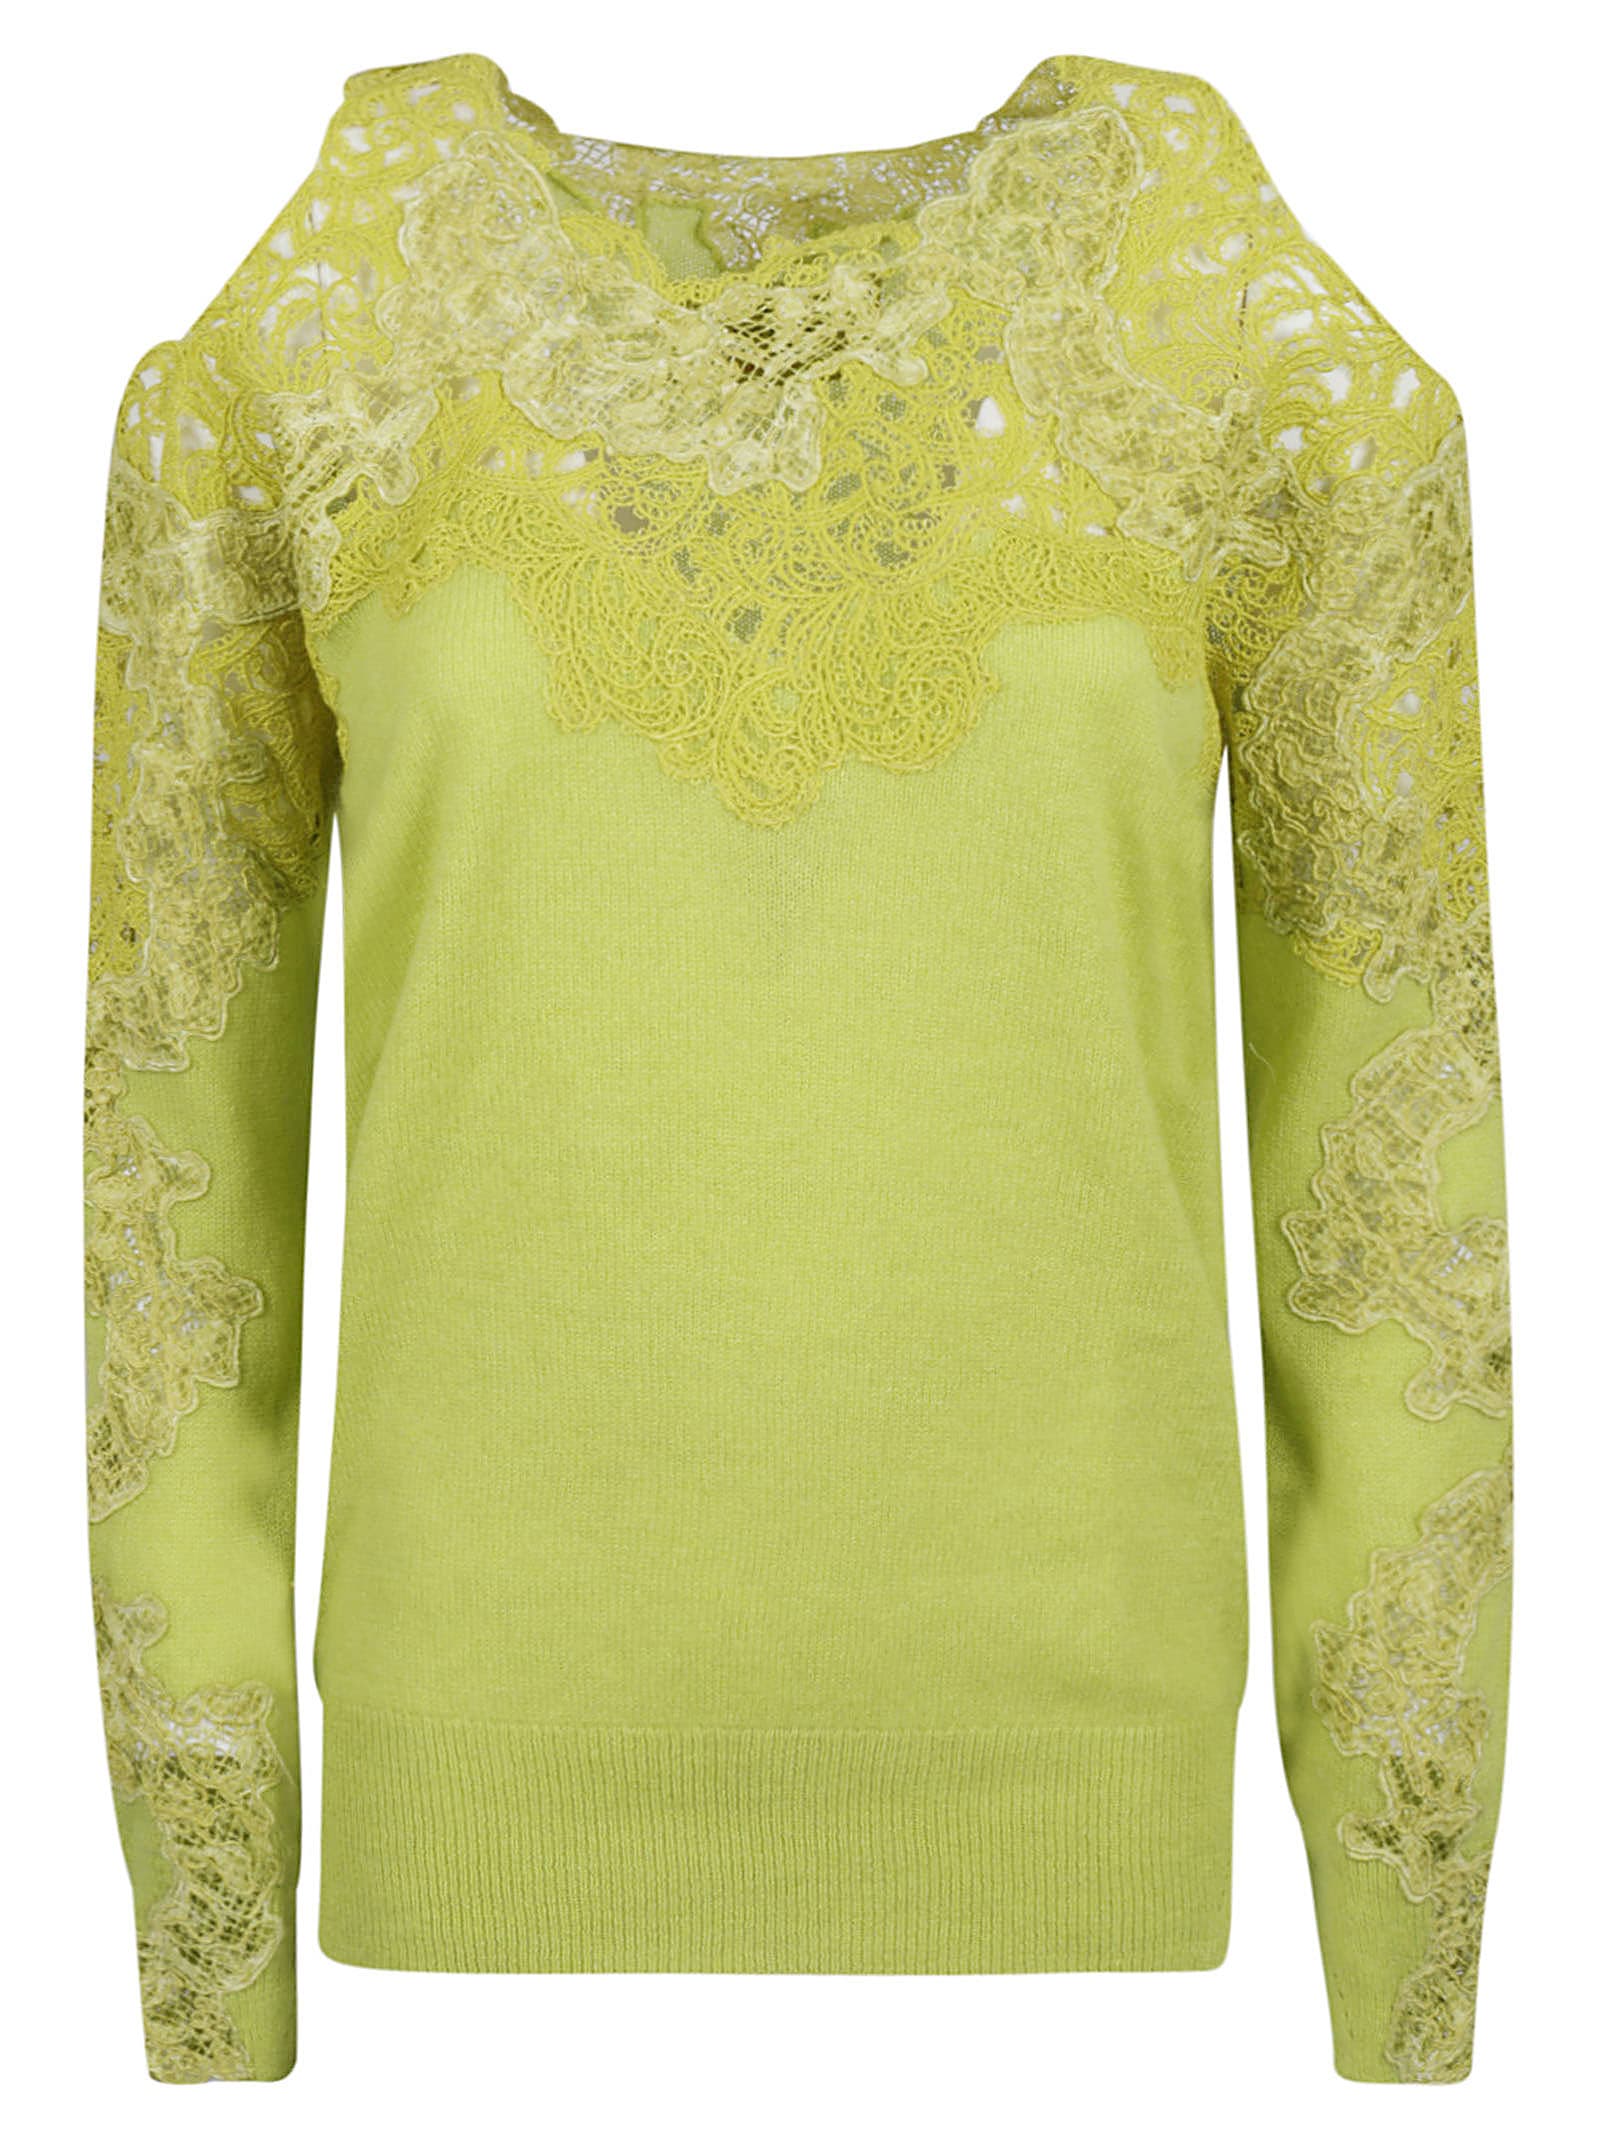 Ermanno Scervino Lace Paneled Cut-out Detail Sweater In Dark Citron